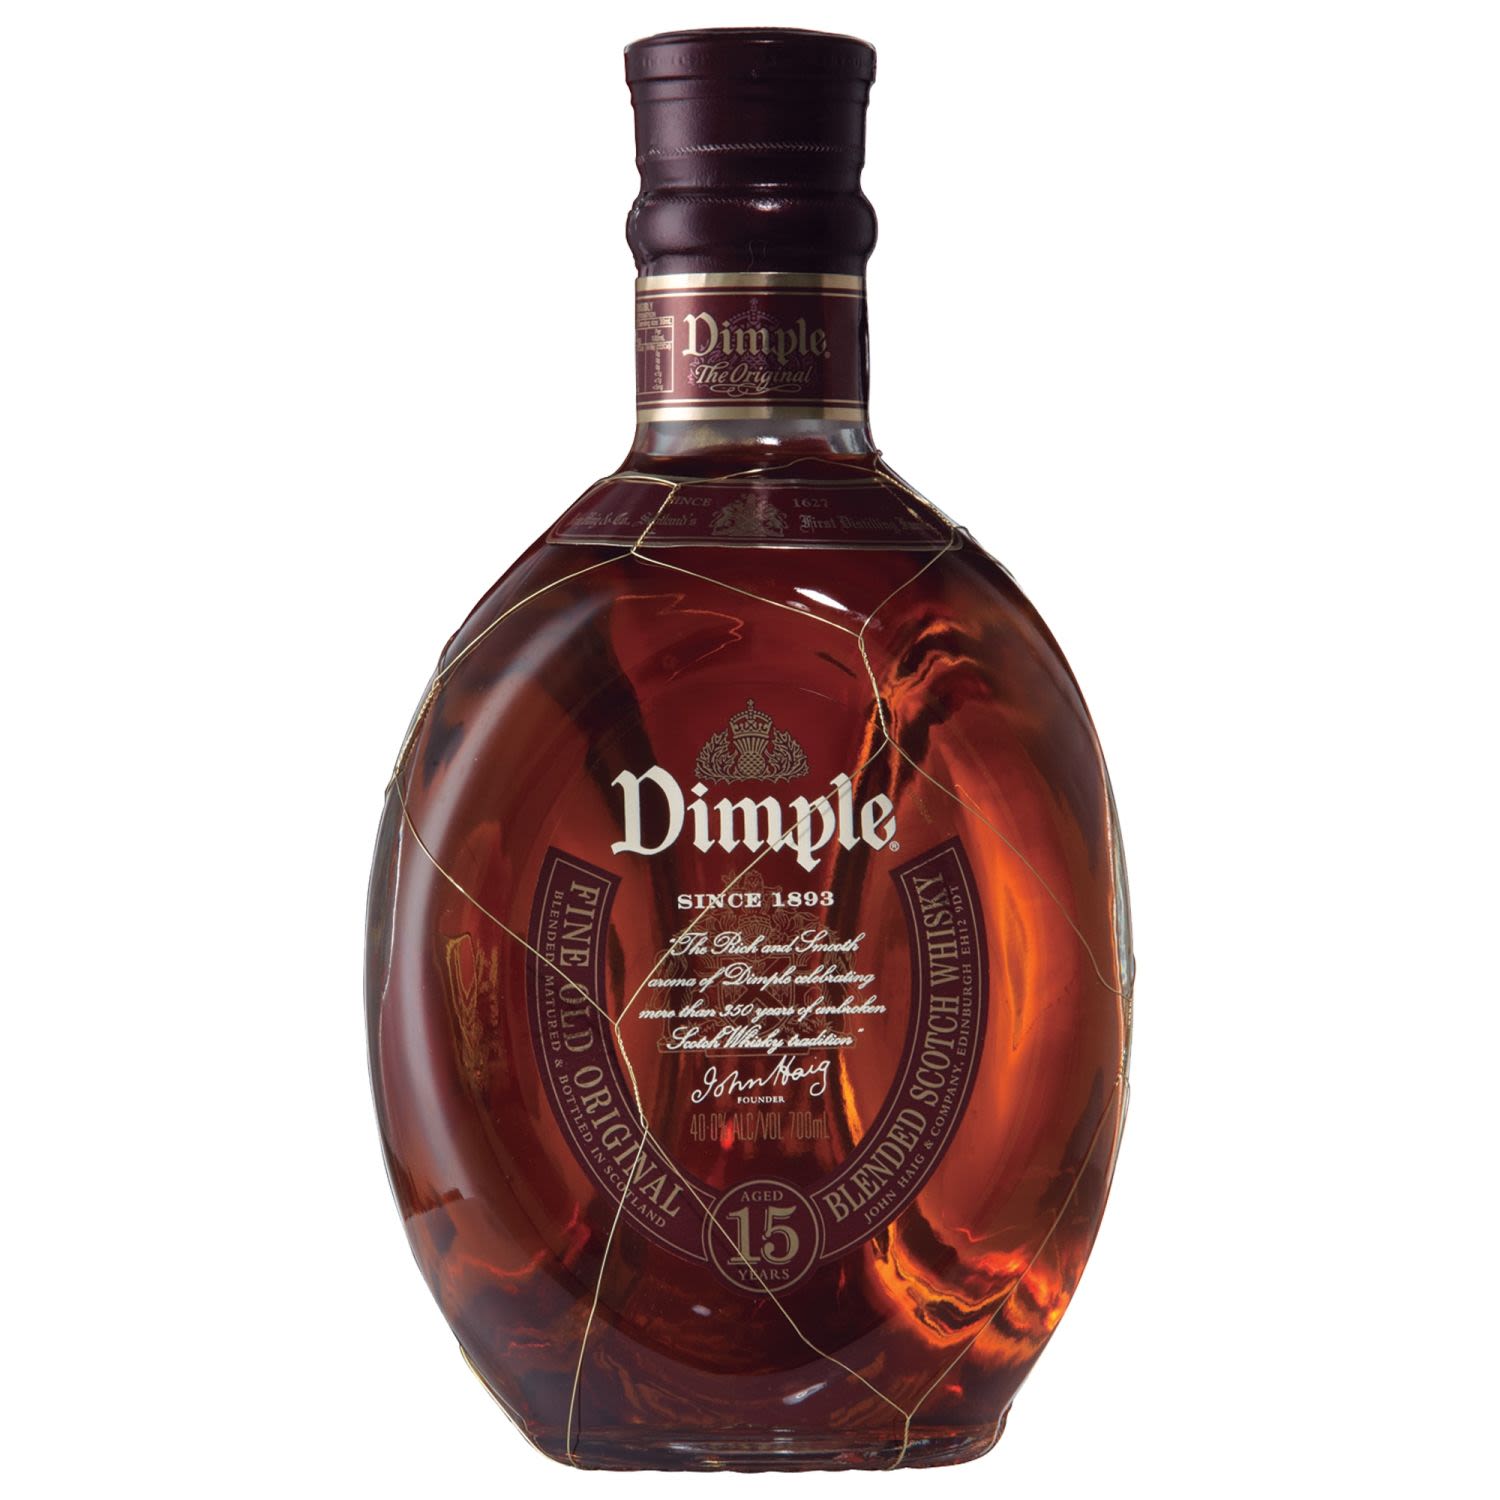 Dimple 15 Year Old Scotch Whisky 700mL Bottle